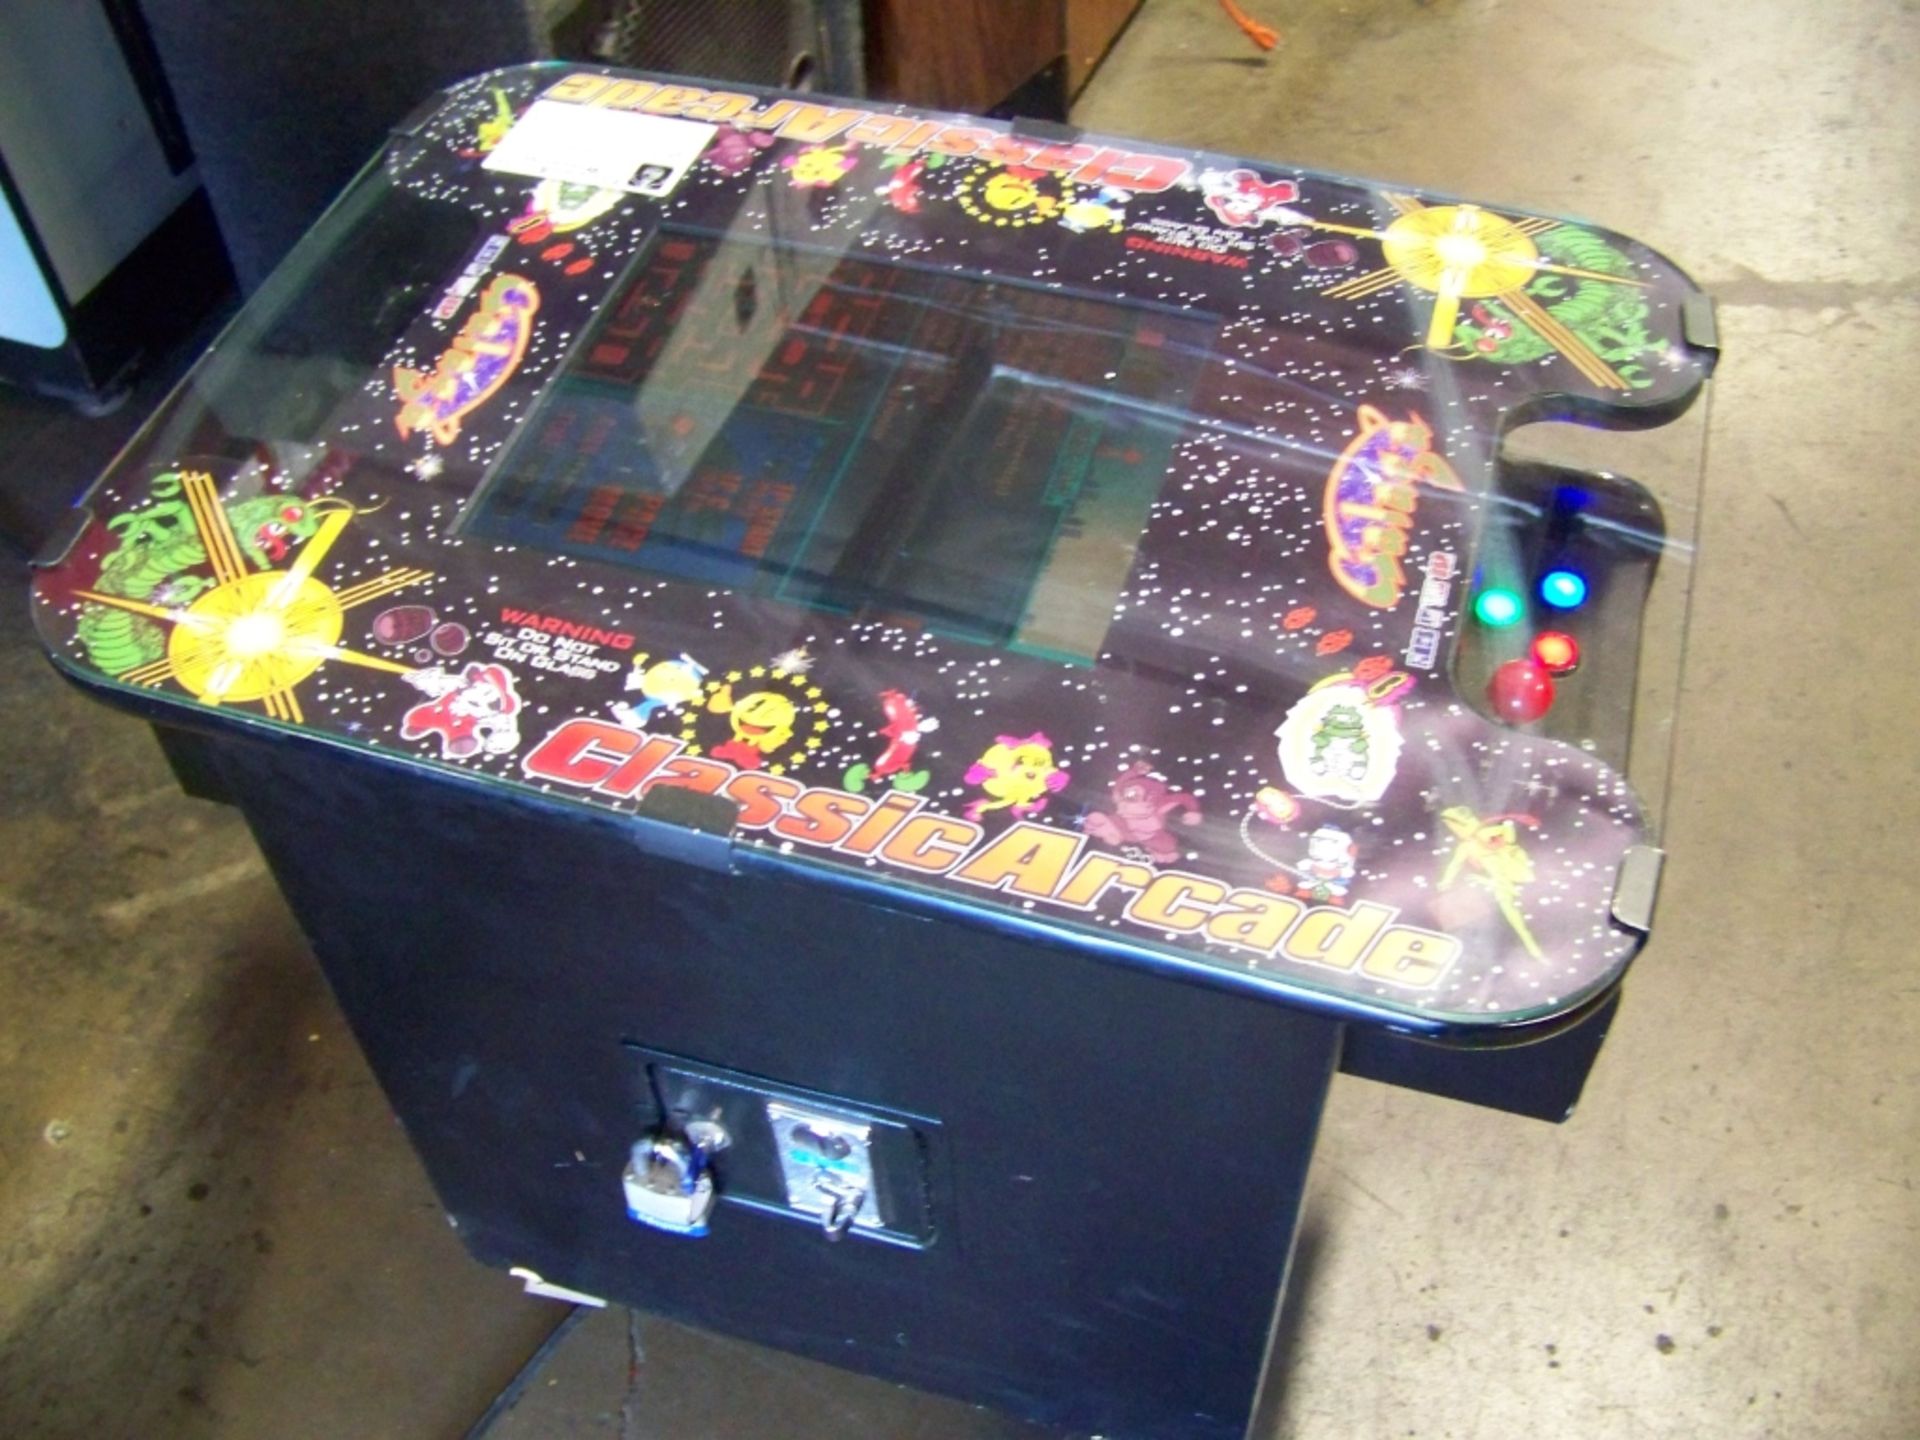 412 IN 1 ARCADE GAME COCKTAIL TABLE